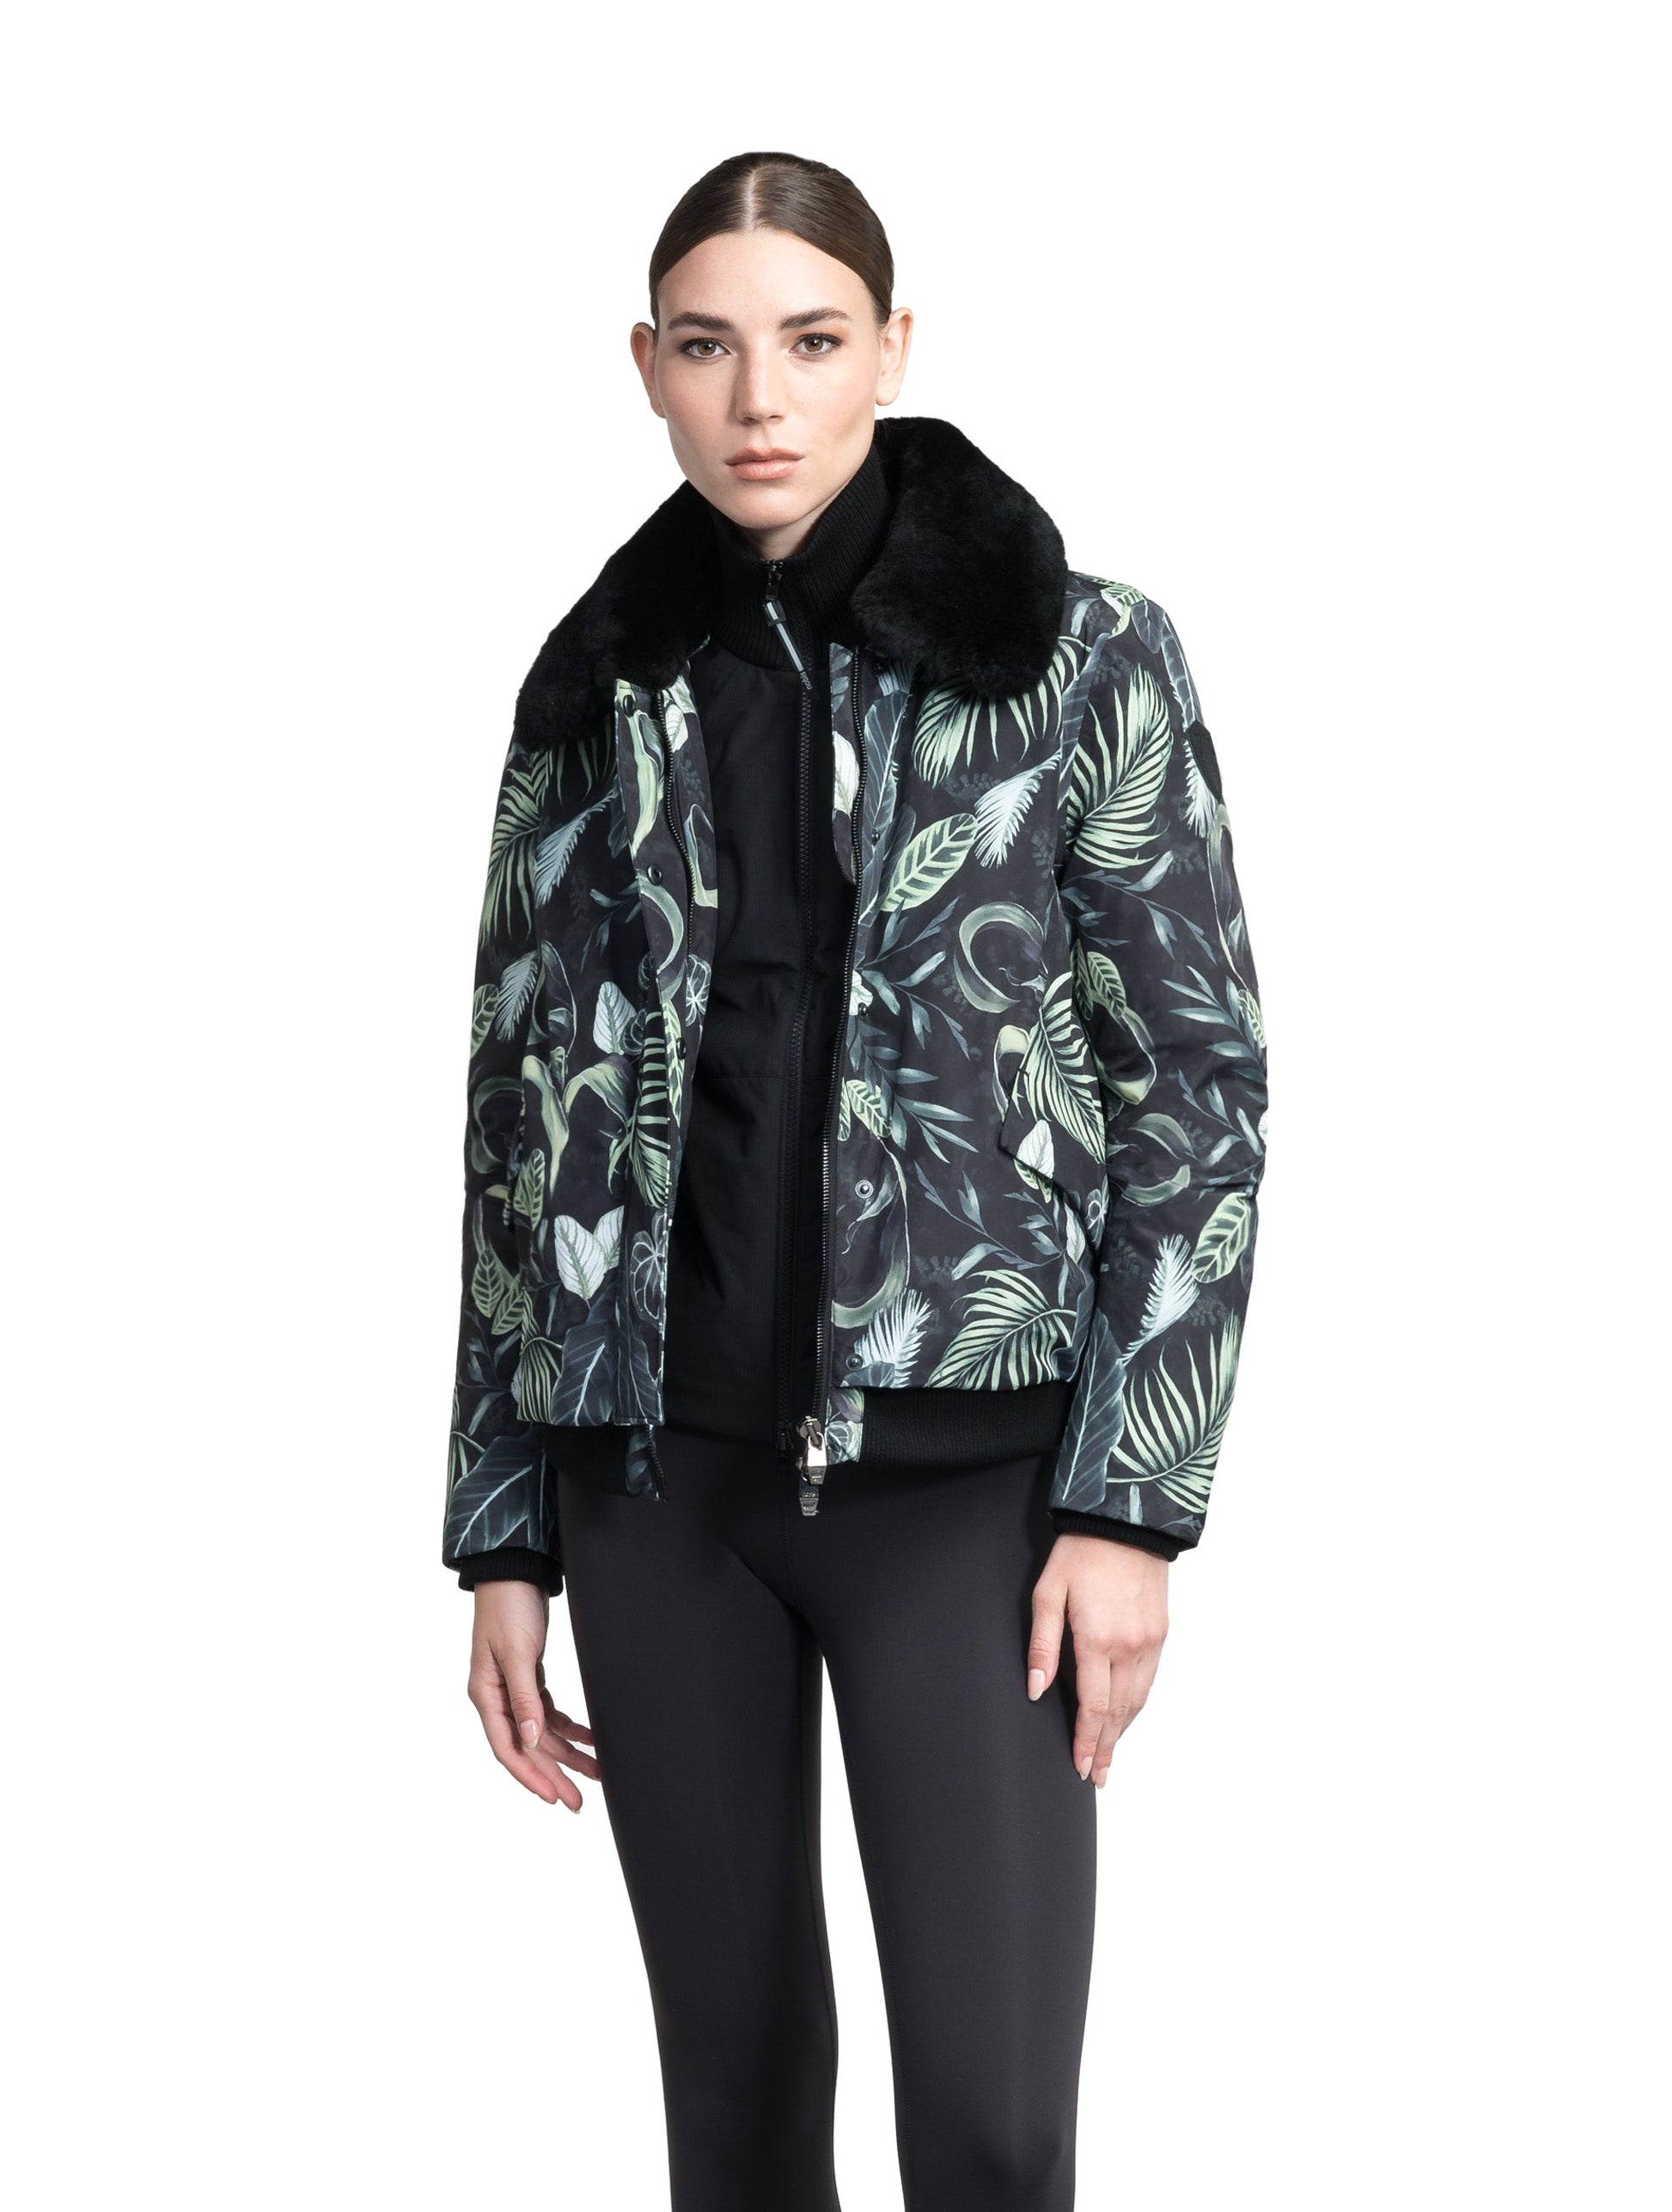 Rae Ladies Aviator Jacket in hip length, Canadian duck down insulation, removable shearling collar with hidden tuckable hood, and two-way front zipper, in Foliage